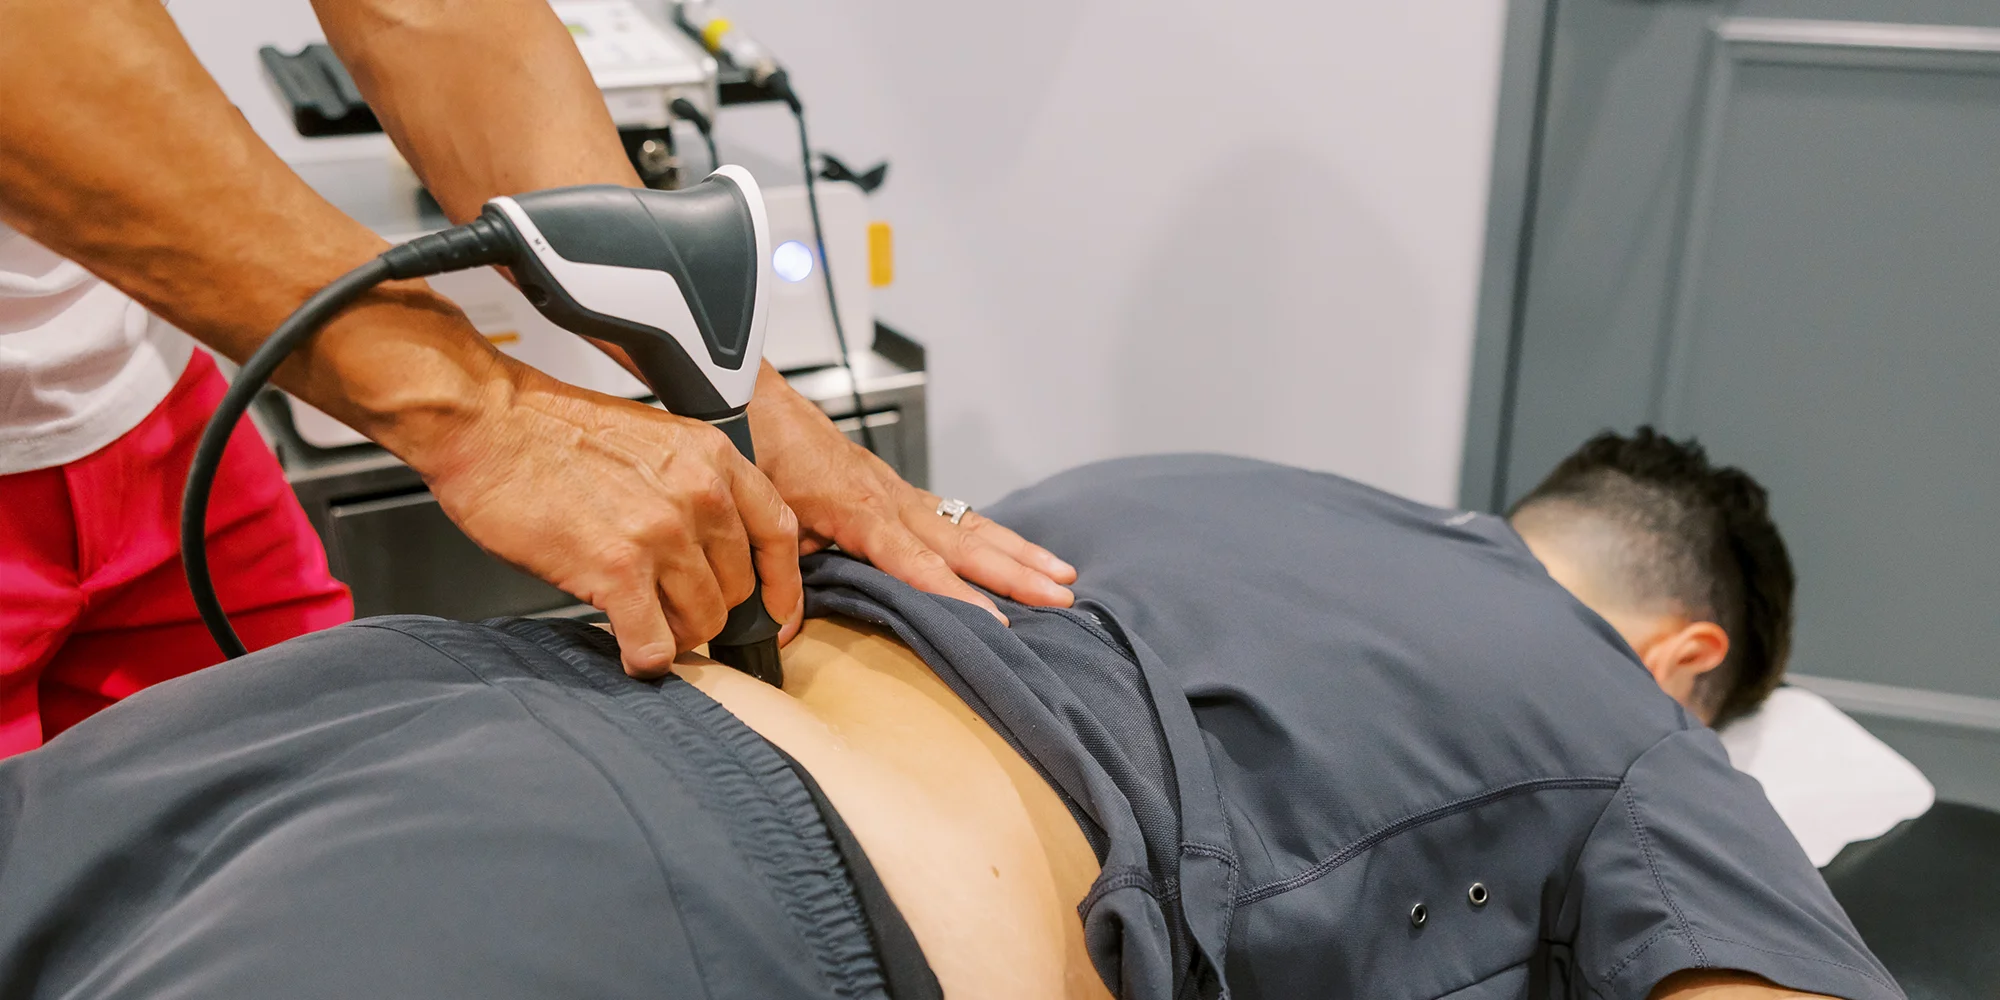 Pain Management Chandler AZ Patient Receiving Shockwave Therapy On Back